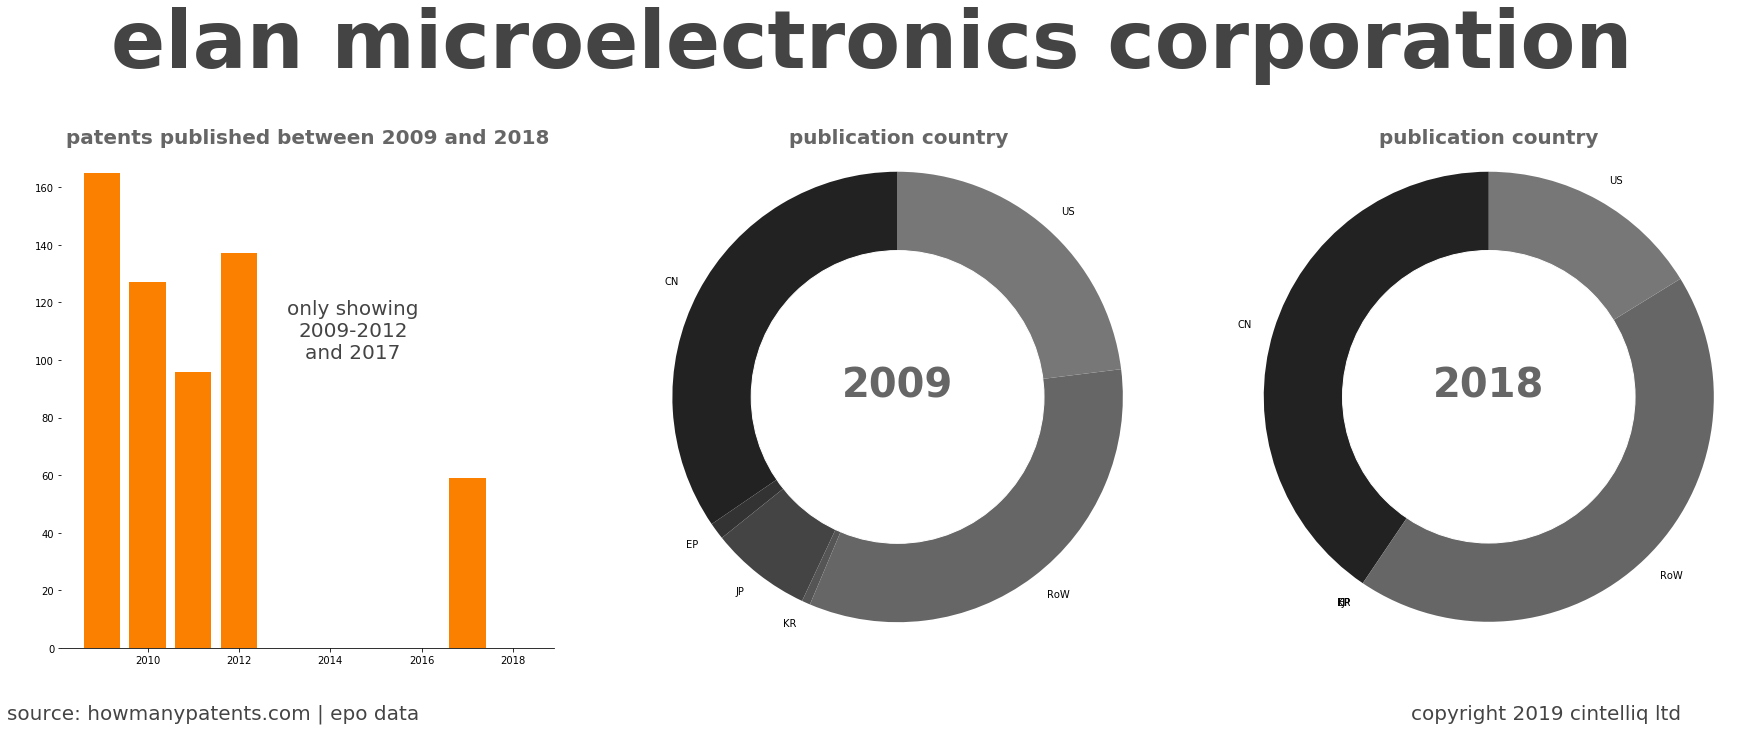 summary of patents for Elan Microelectronics Corporation